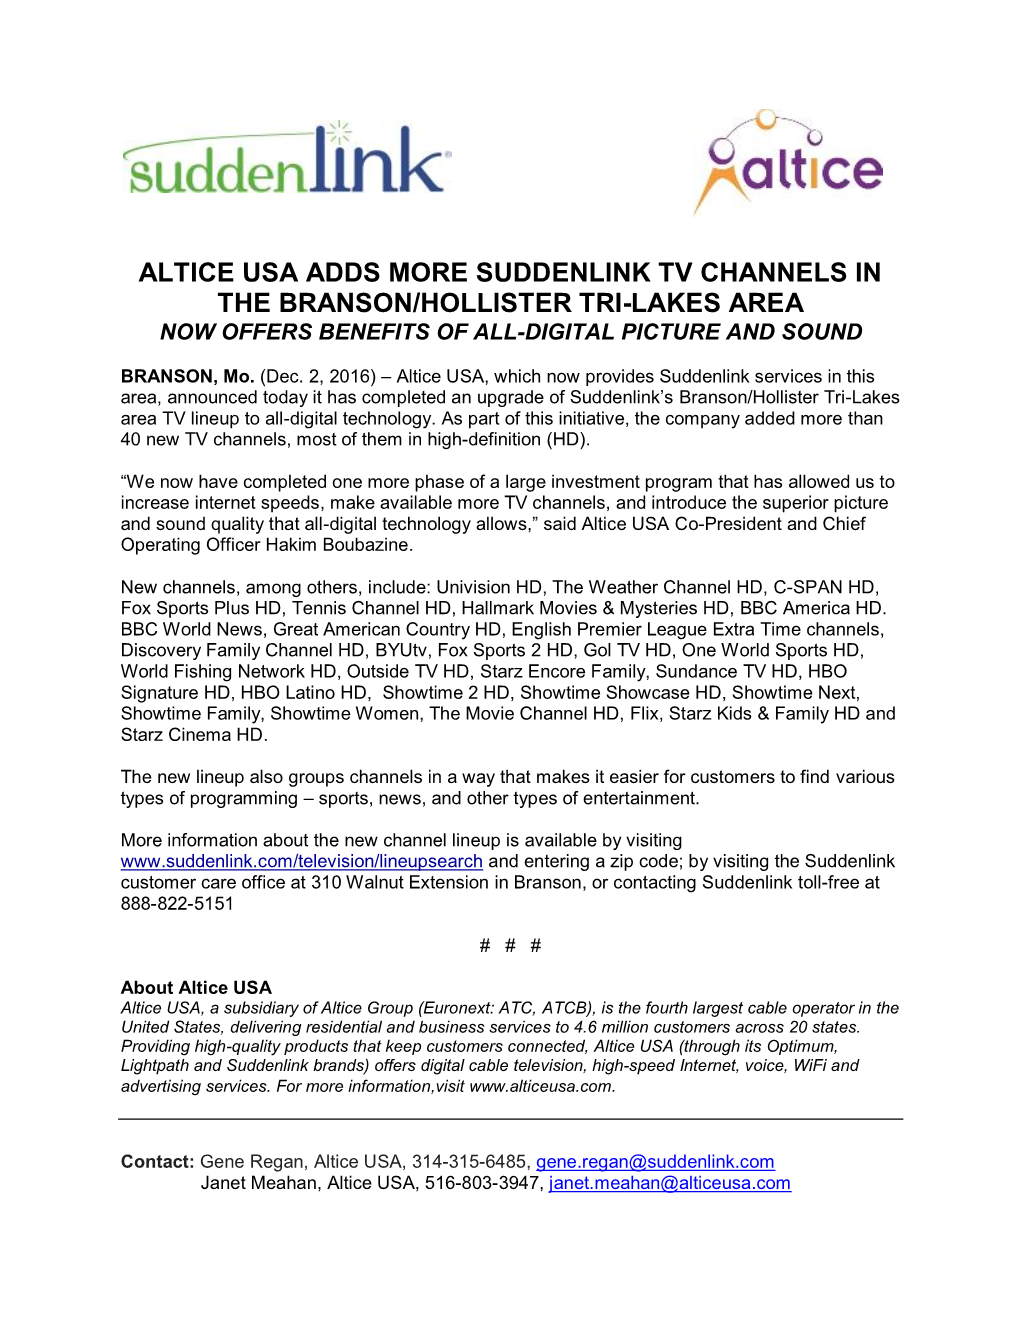 Altice Usa Adds More Suddenlink Tv Channels in the Branson/Hollister Tri-Lakes Area Now Offers Benefits of All-Digital Picture and Sound